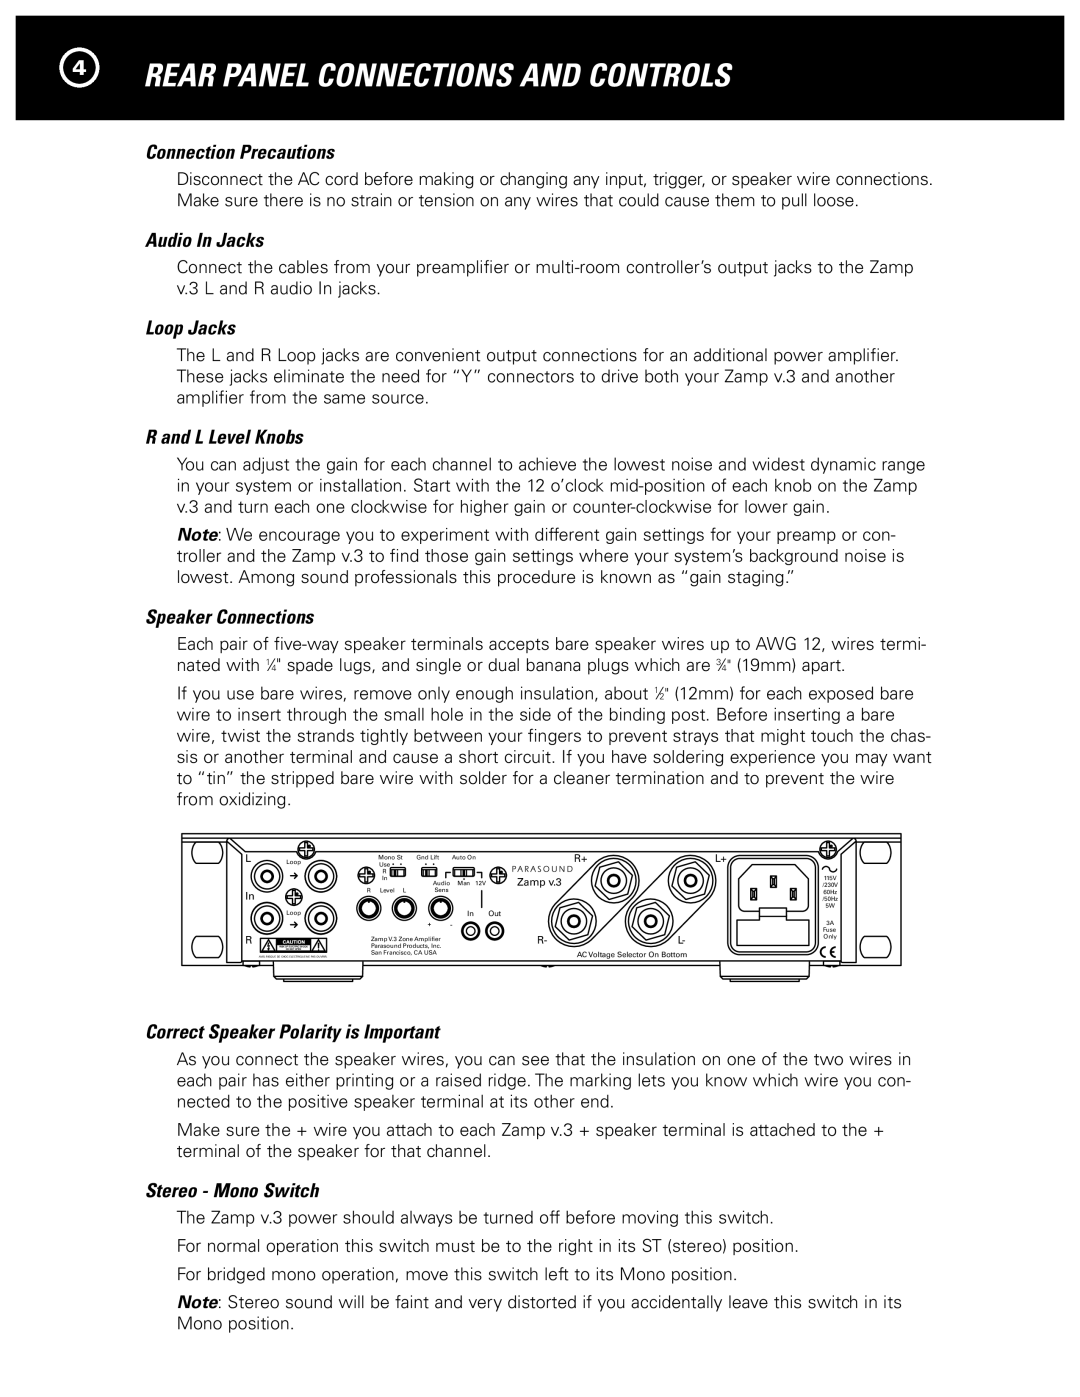 Parasound Zamp v.3 manual 4REAR PANEL CONNECTIONS AND CONTROLS, Connection Precautions, Audio In Jacks, Loop Jacks 